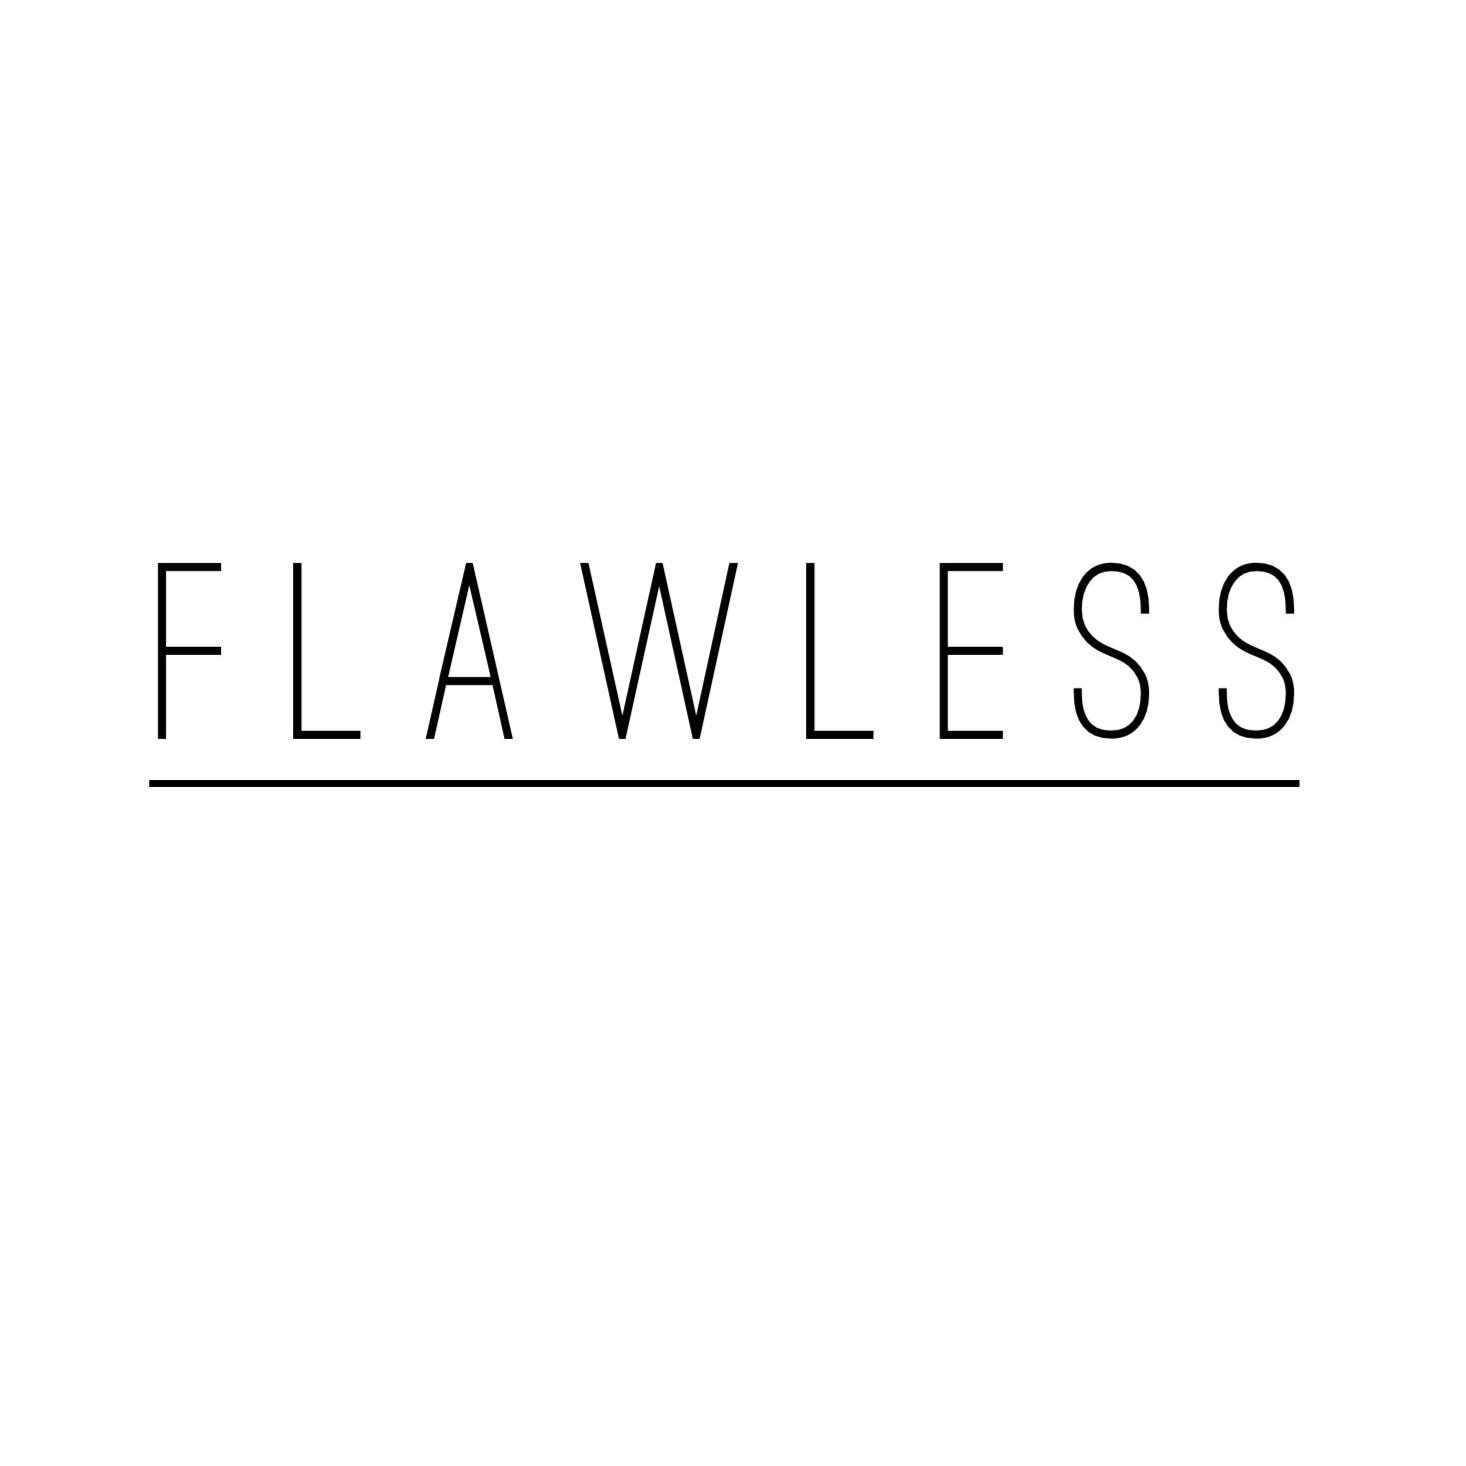 HQ Flawless Wallpapers | File 32.03Kb